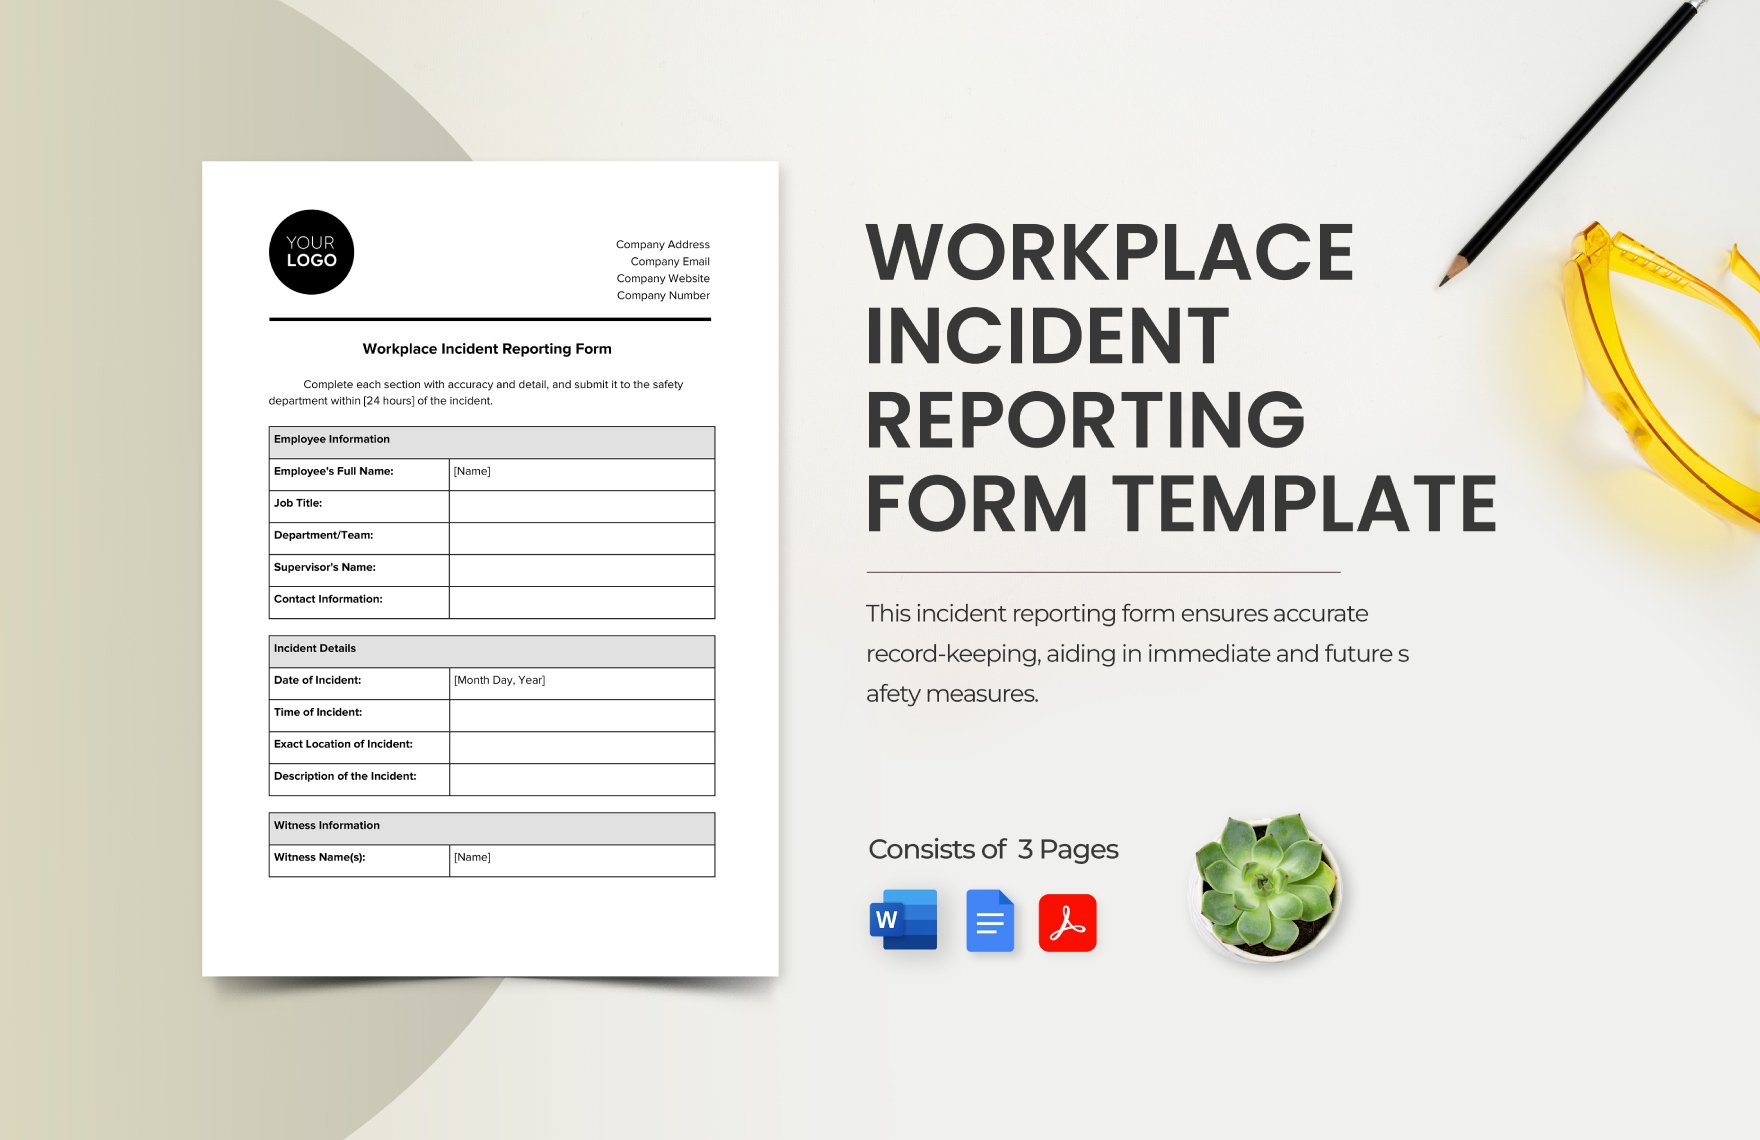 Workplace Incident Reporting Form Template in Word, Google Docs, PDF